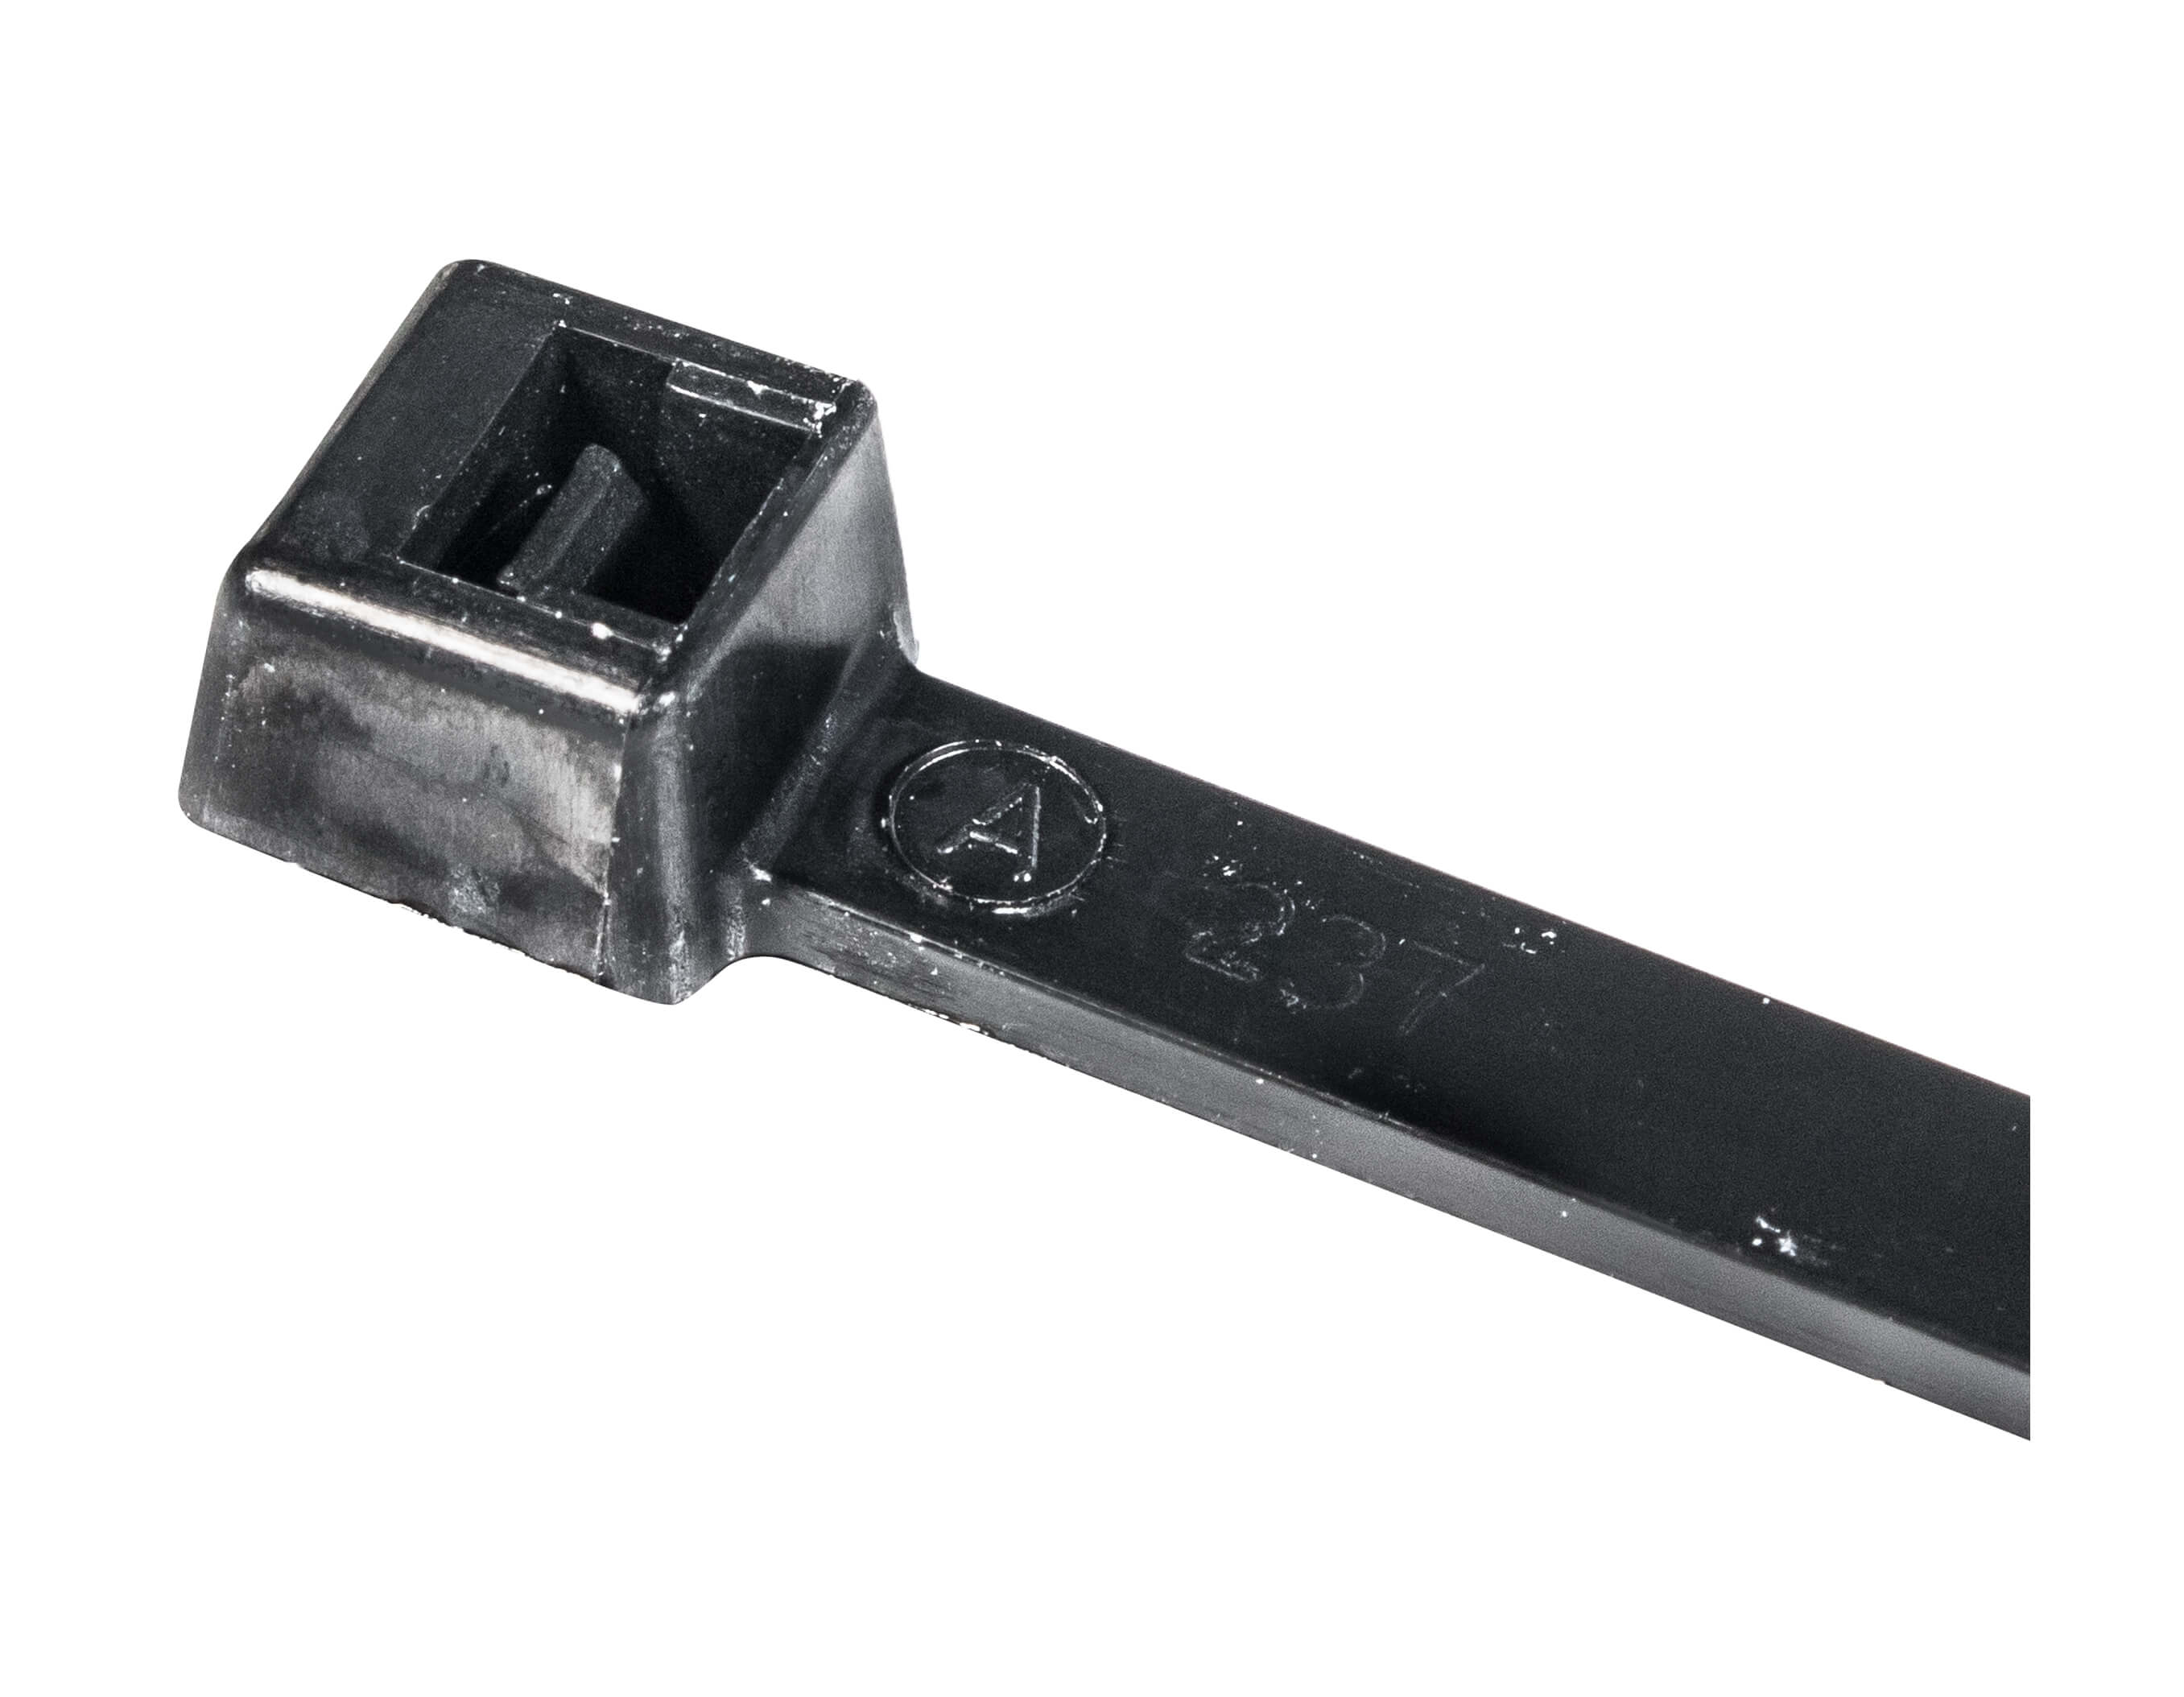 COLD TEMP. CABLE TIE BLACK 0.18 X 7.56" 50LBS